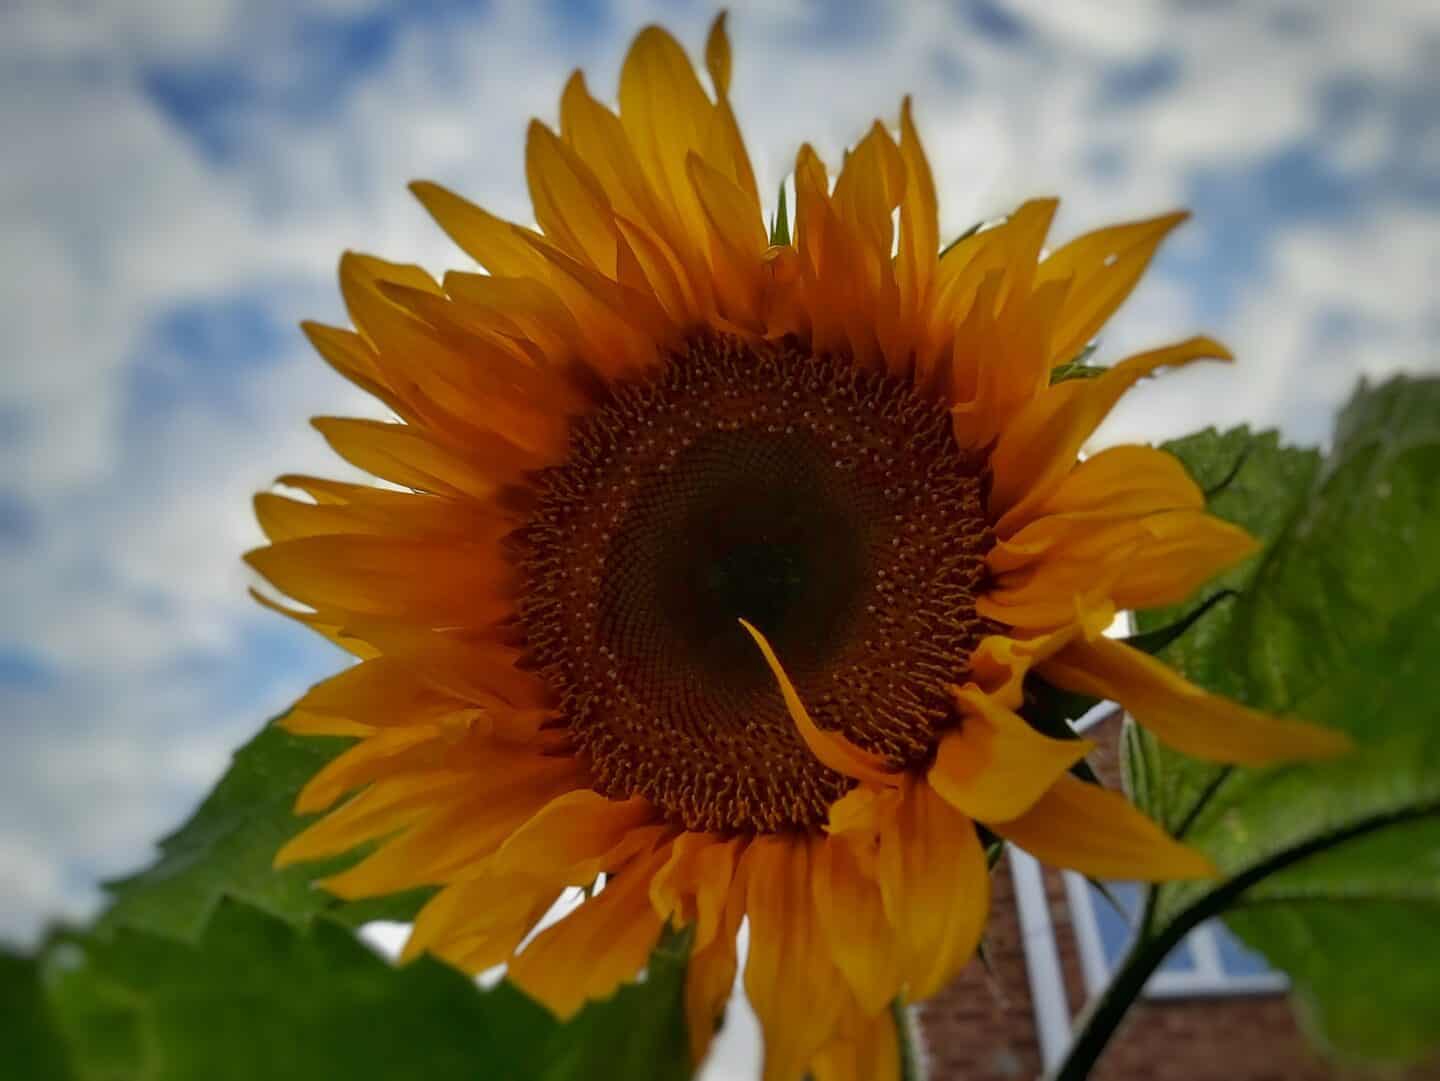 Yellow head of a large sunflower in bloom against the backdrop of blue sky